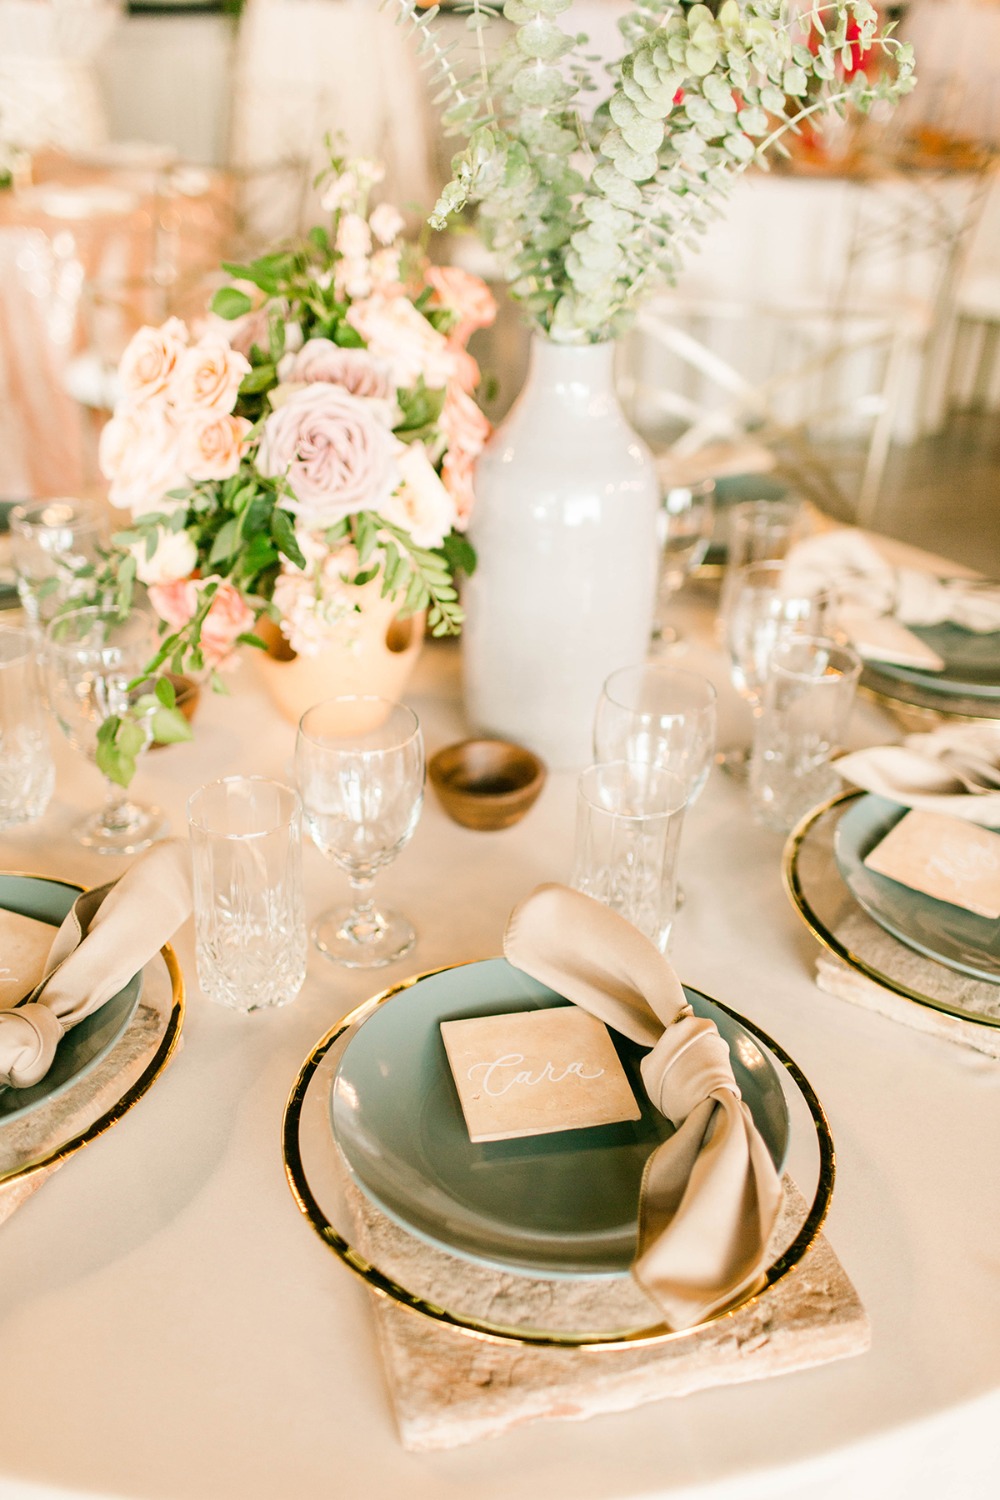 neutral and teal wedding place setting with tile chargers and place cards